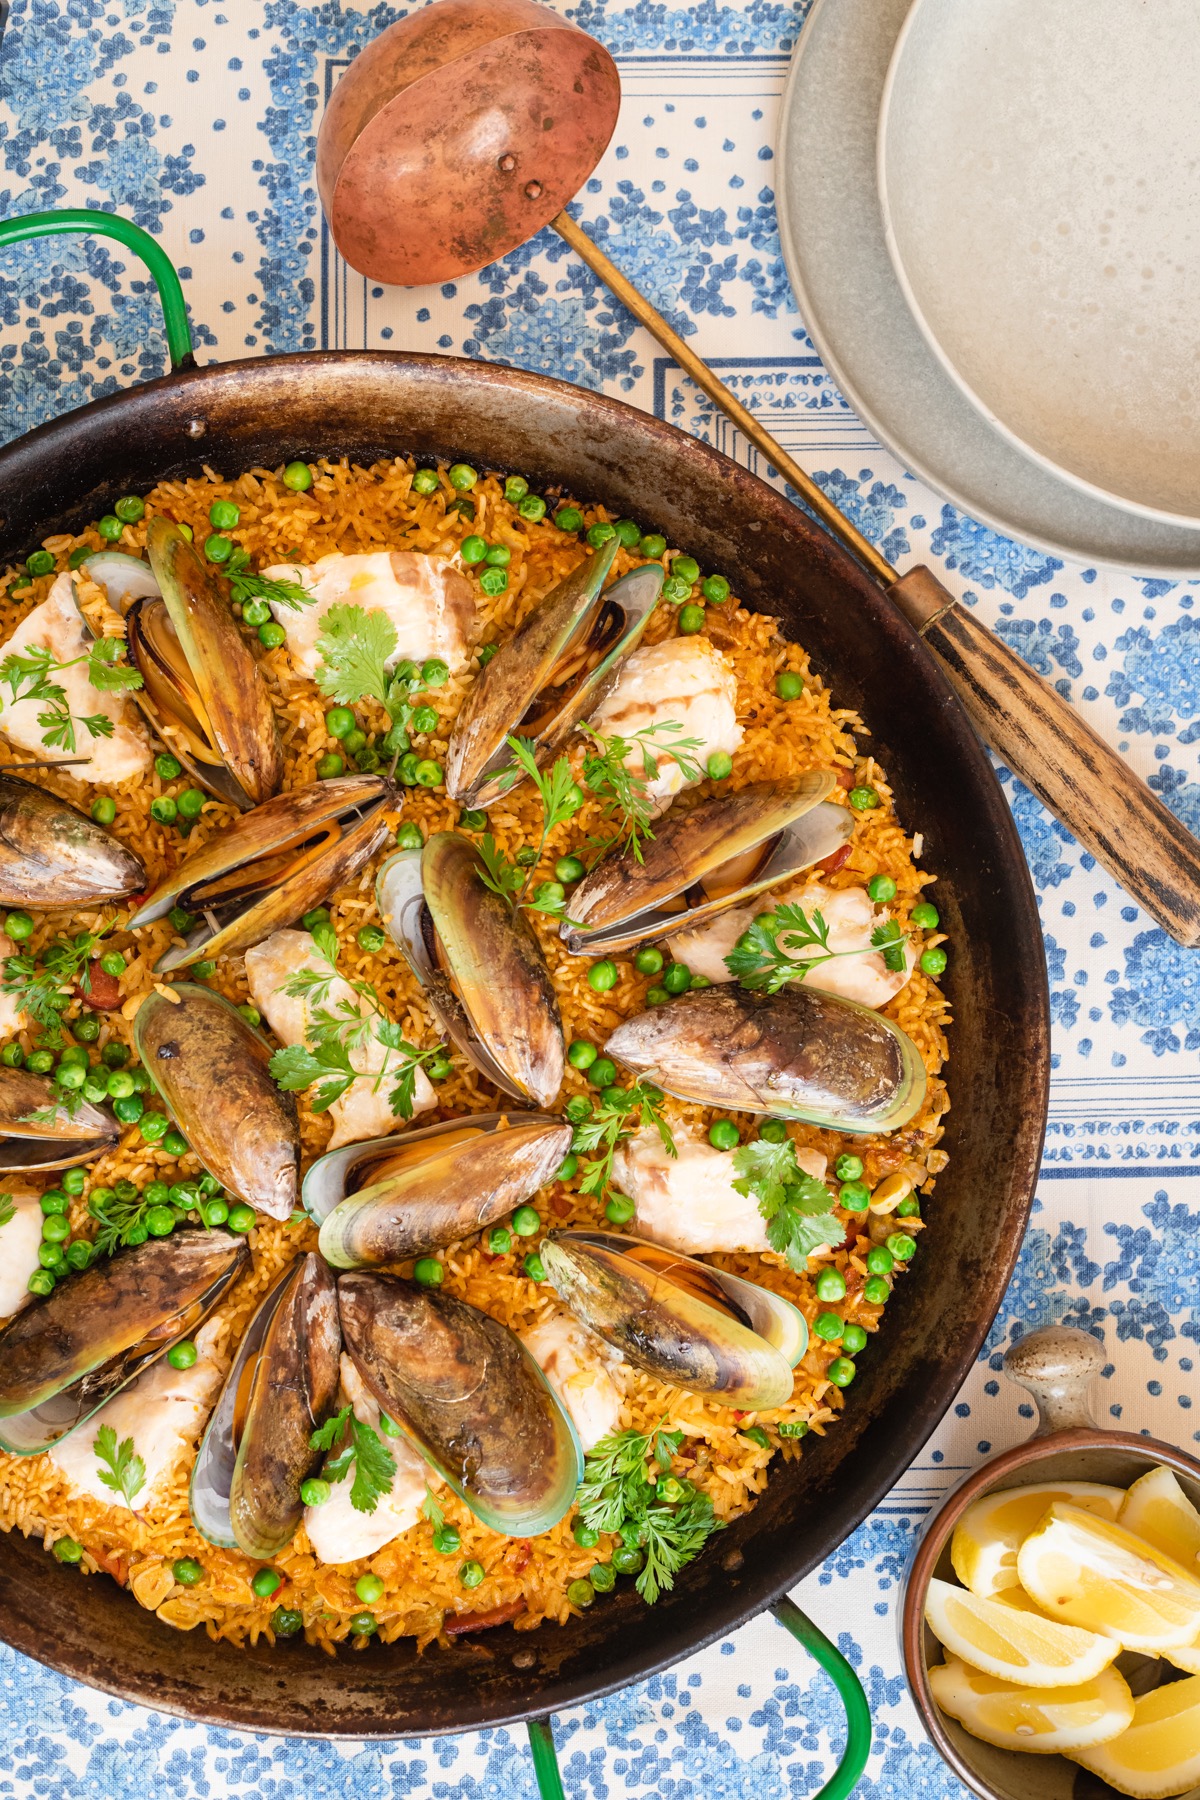 https://www.homegrown-kitchen.co.nz/wp-content/uploads/2020/11/Seafood-Paella-Fish-Stock-Nicola-Galloway-Homegrown-Kitchen-3-of-4.jpg